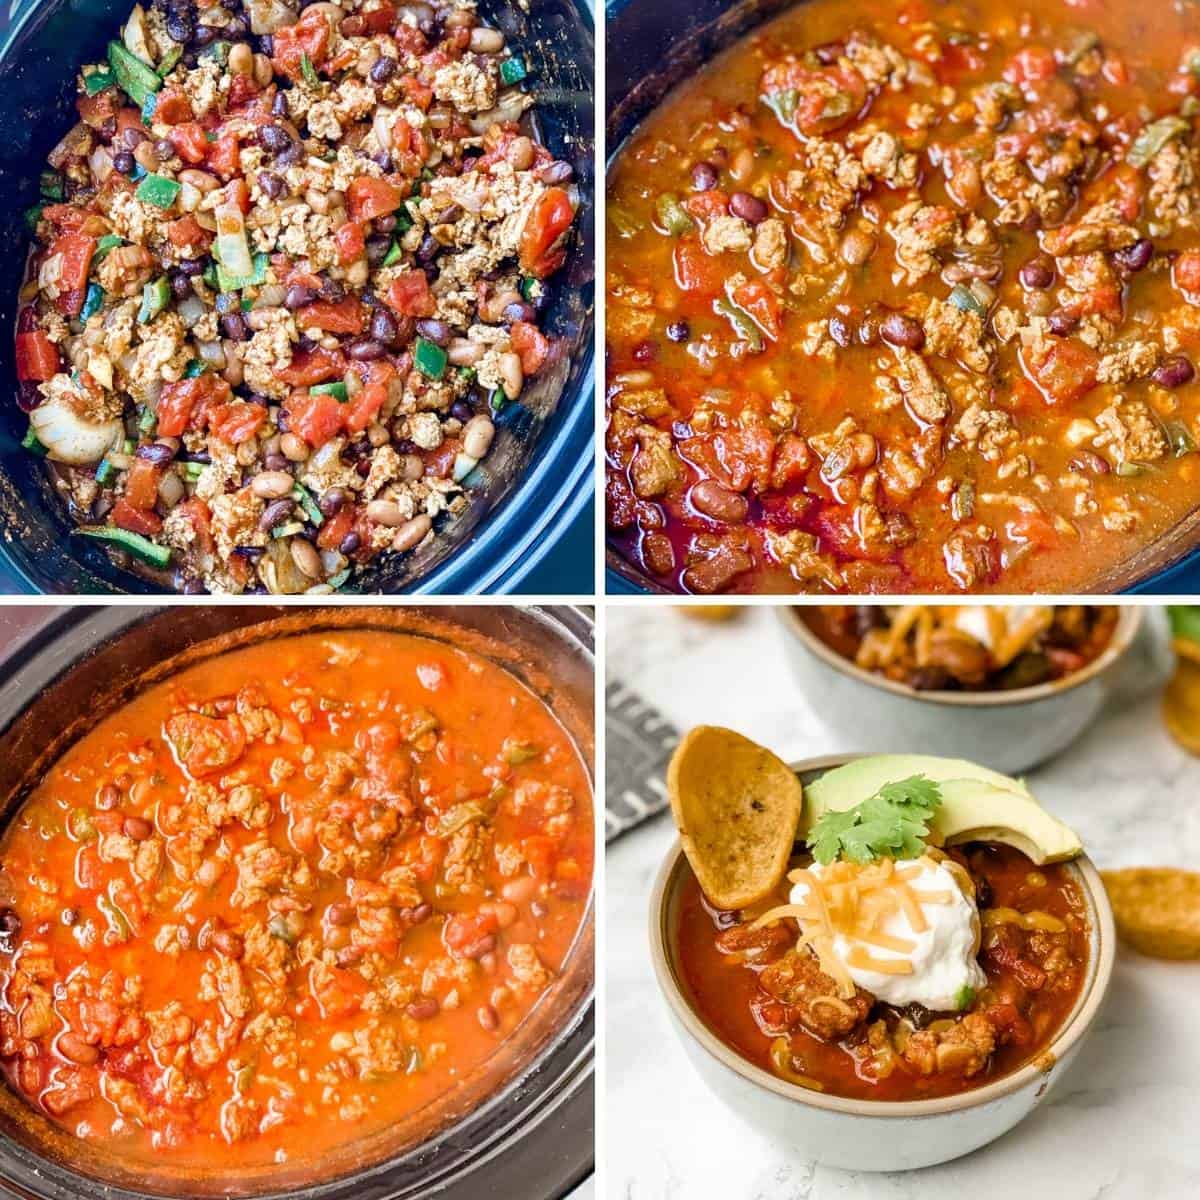 second collage showing how to make sausage chili recipe